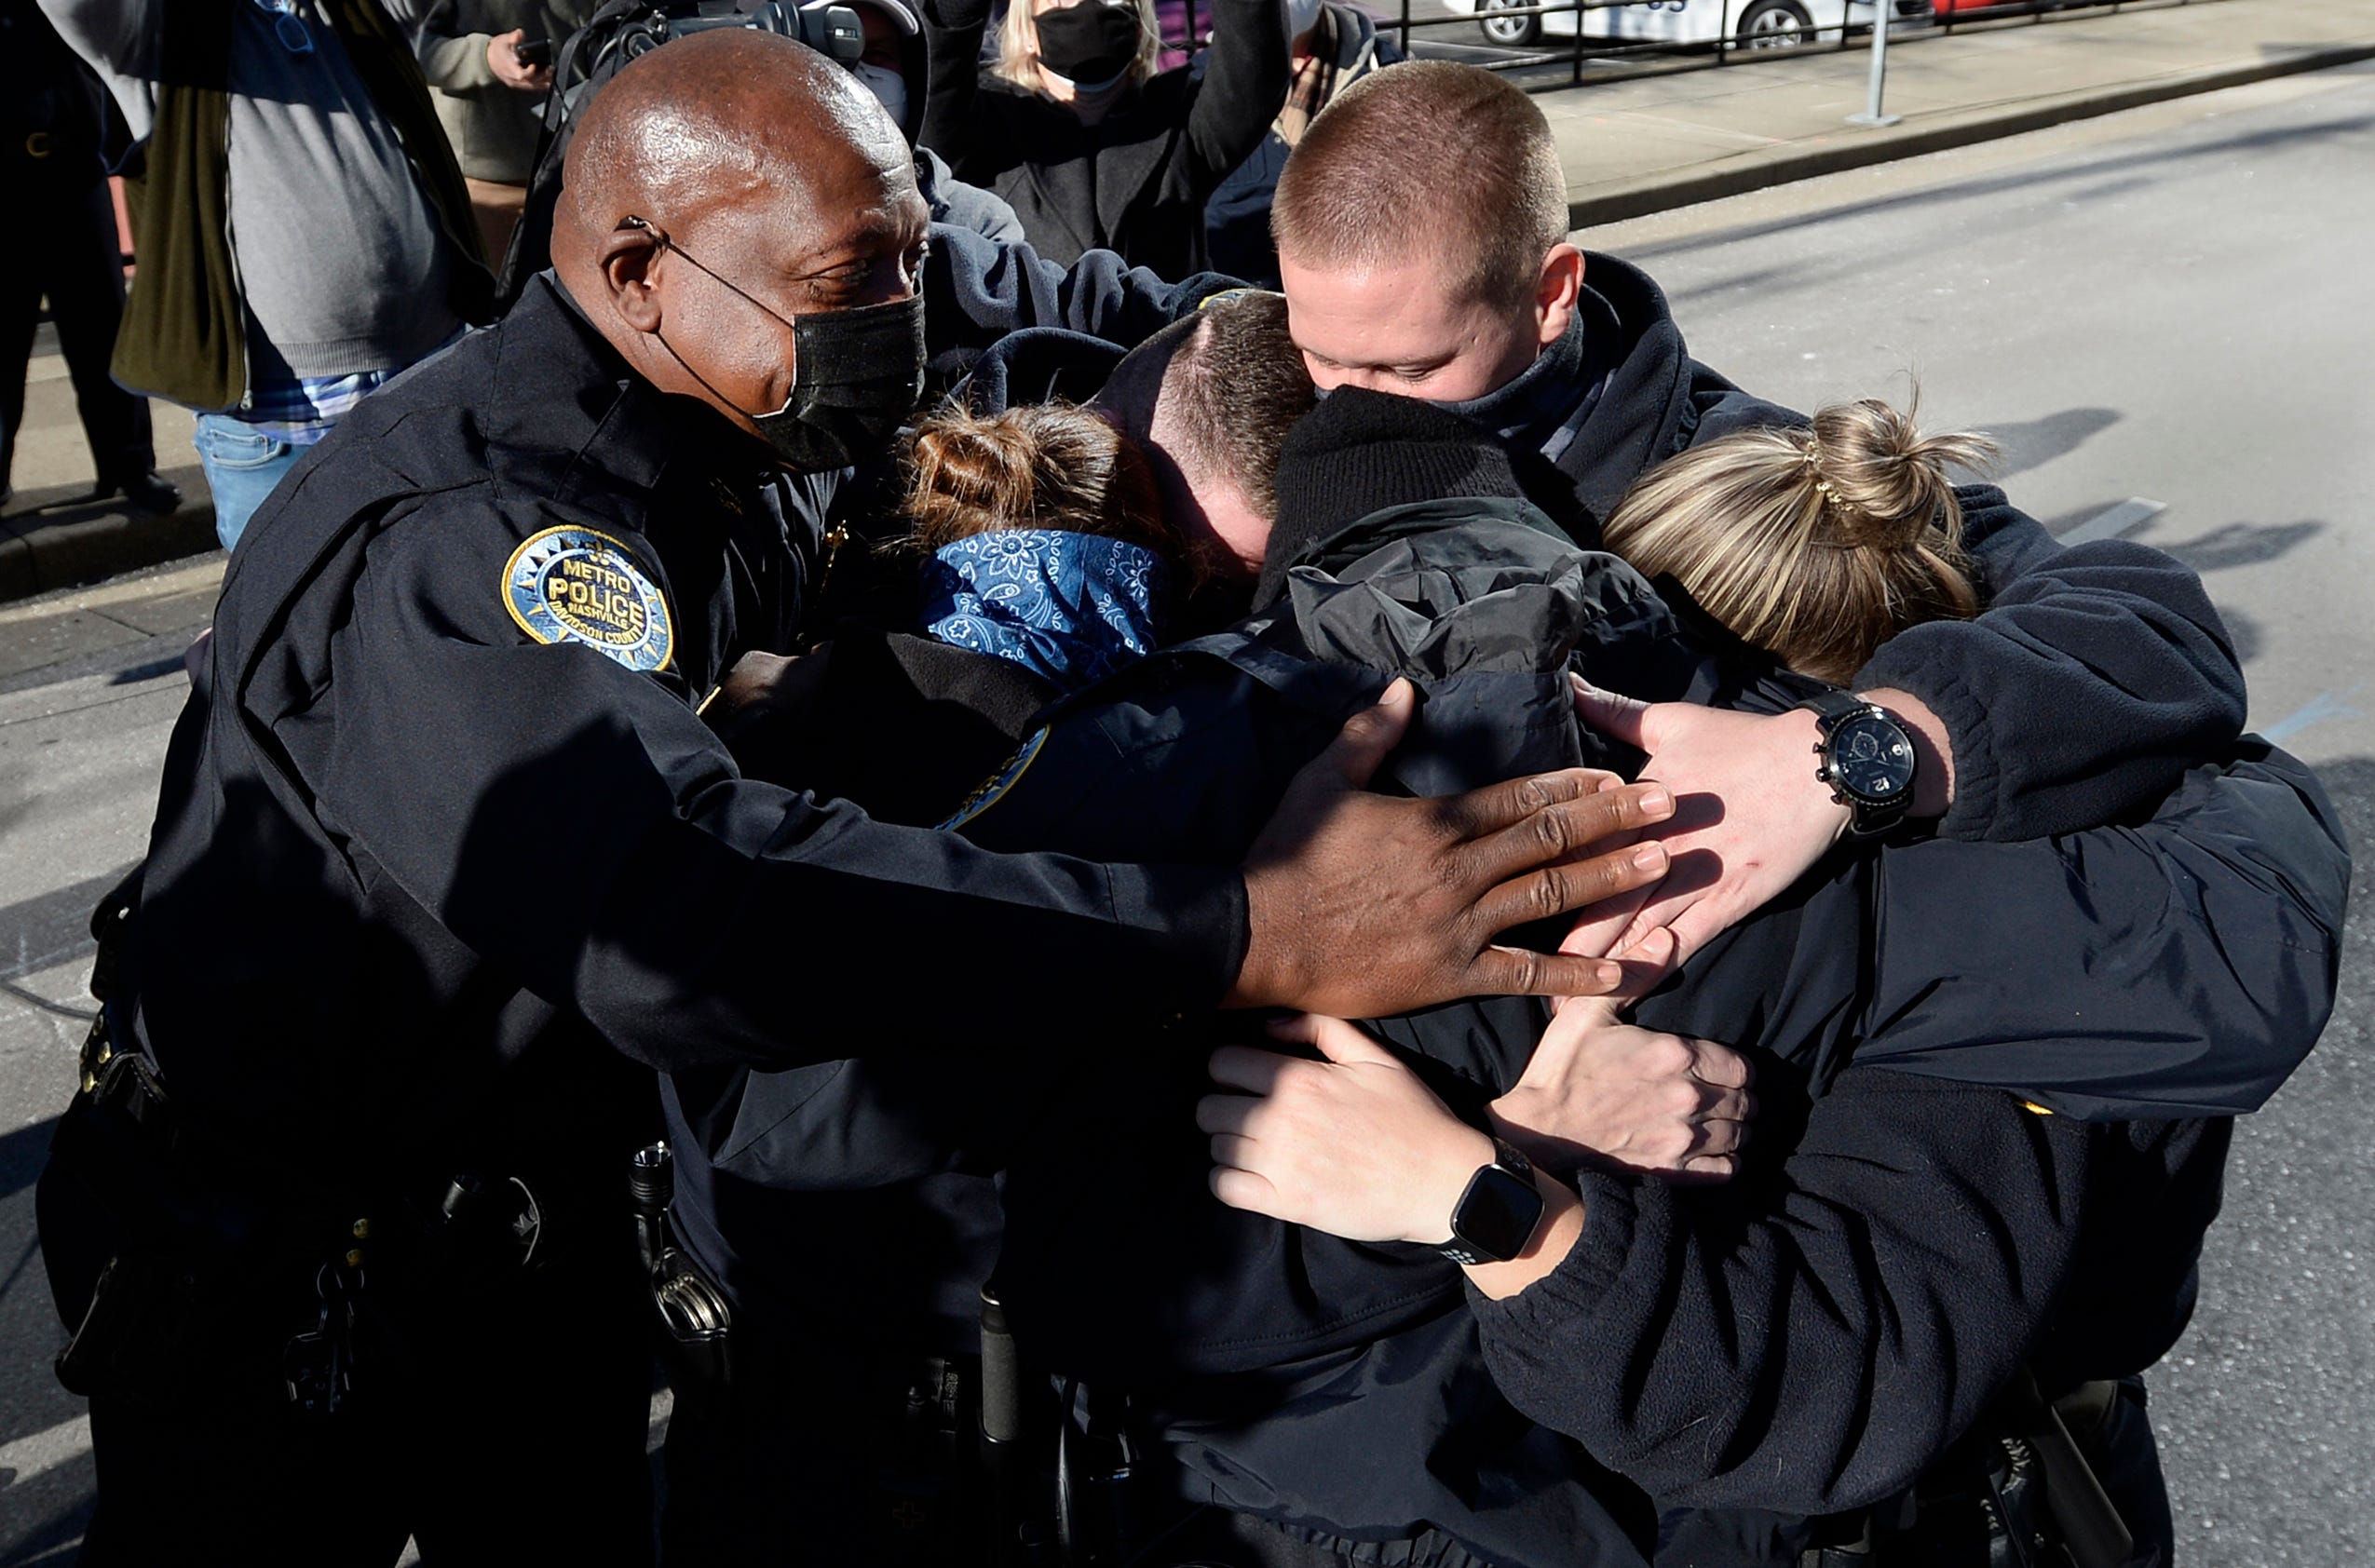 Nashville Metro Police Chief John Drake, left, and officers Amanda Topping, Michael Sipos, Tylor Luellen, Brenna Hosey, and James Wells spend a moment in a group hug after the press conference on Sunday, December 27, 2020 in Nashville, Tenn.